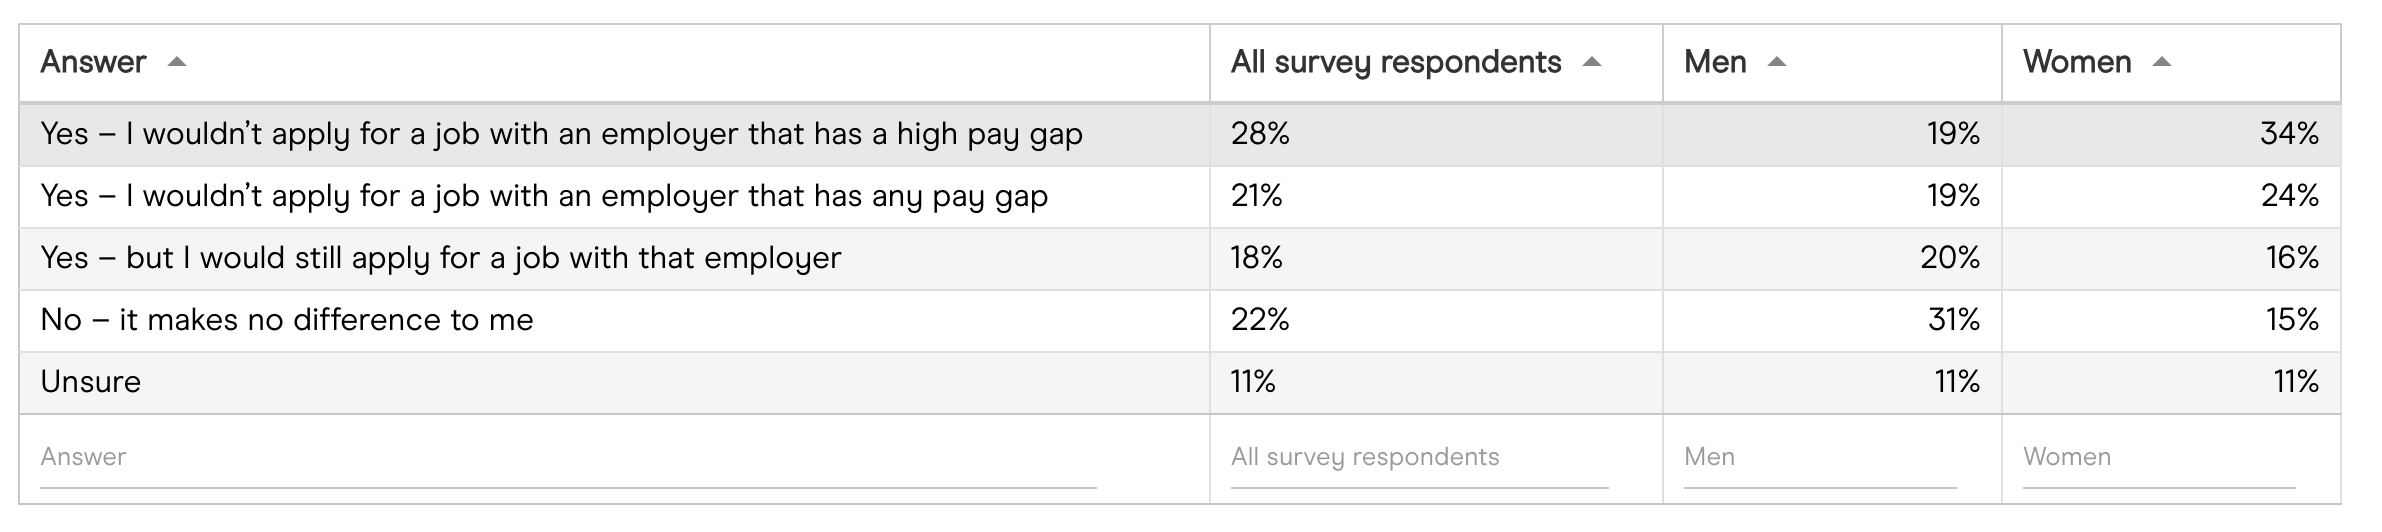 would you take an employer’s gender pay gap into consideration when job hunting